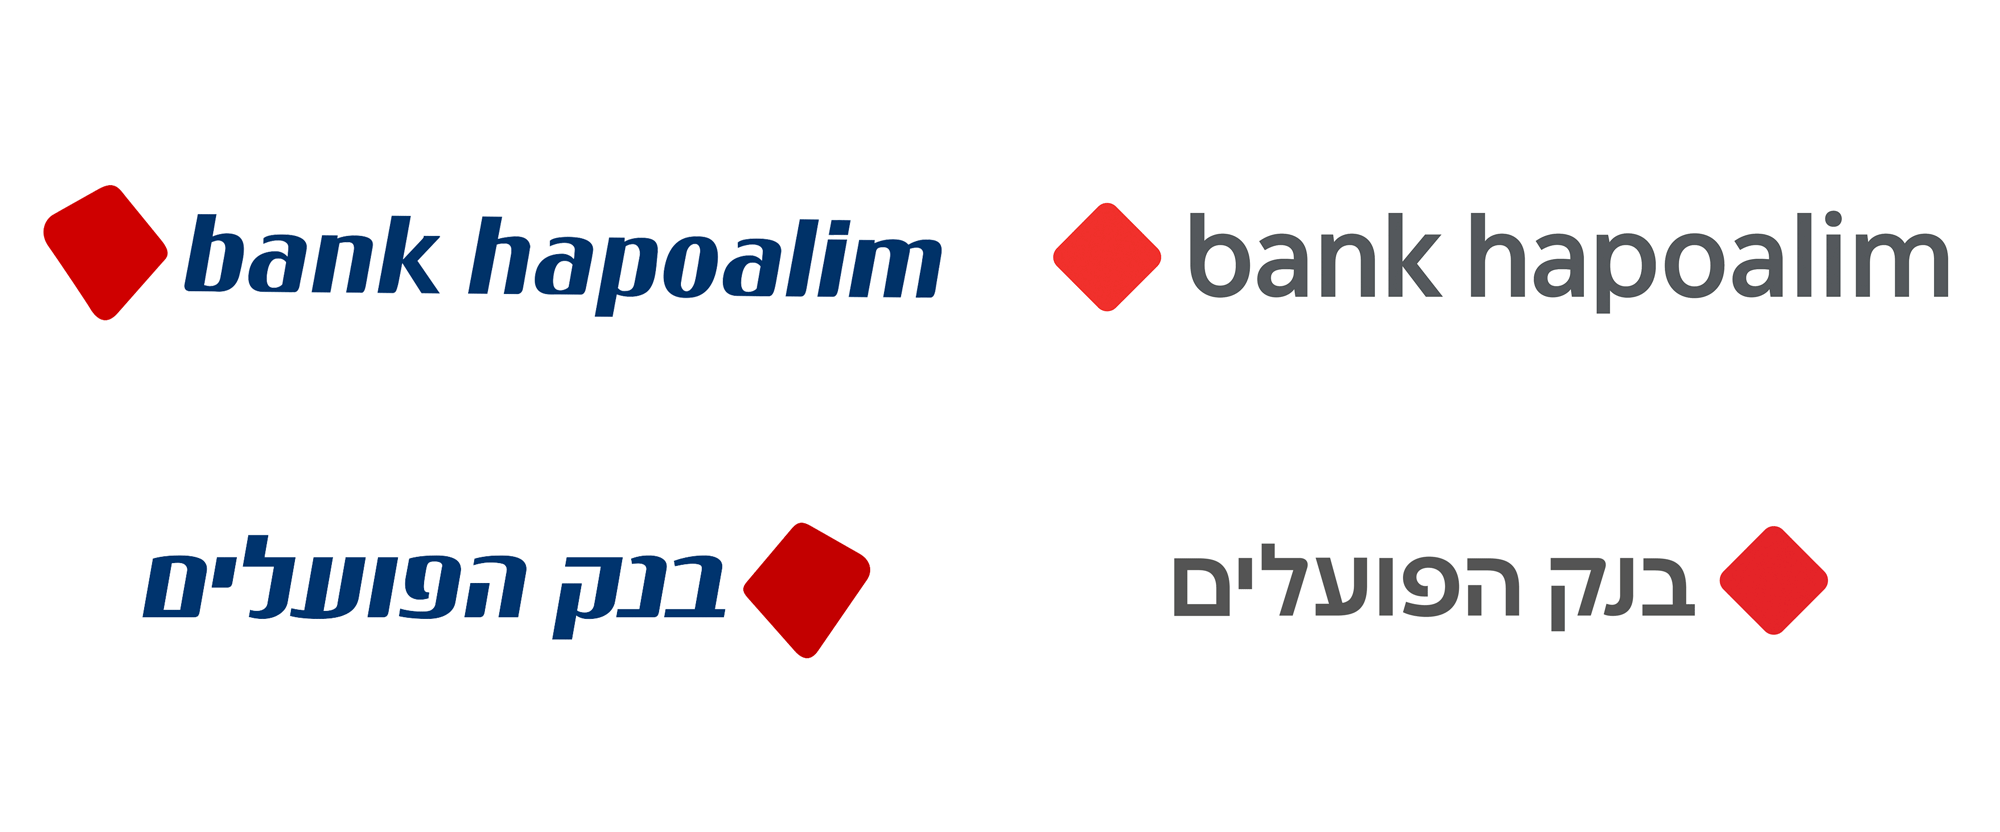 Bank Brand Logo - Brand New: New Logo and Identity for Bank Hapoalim by Open